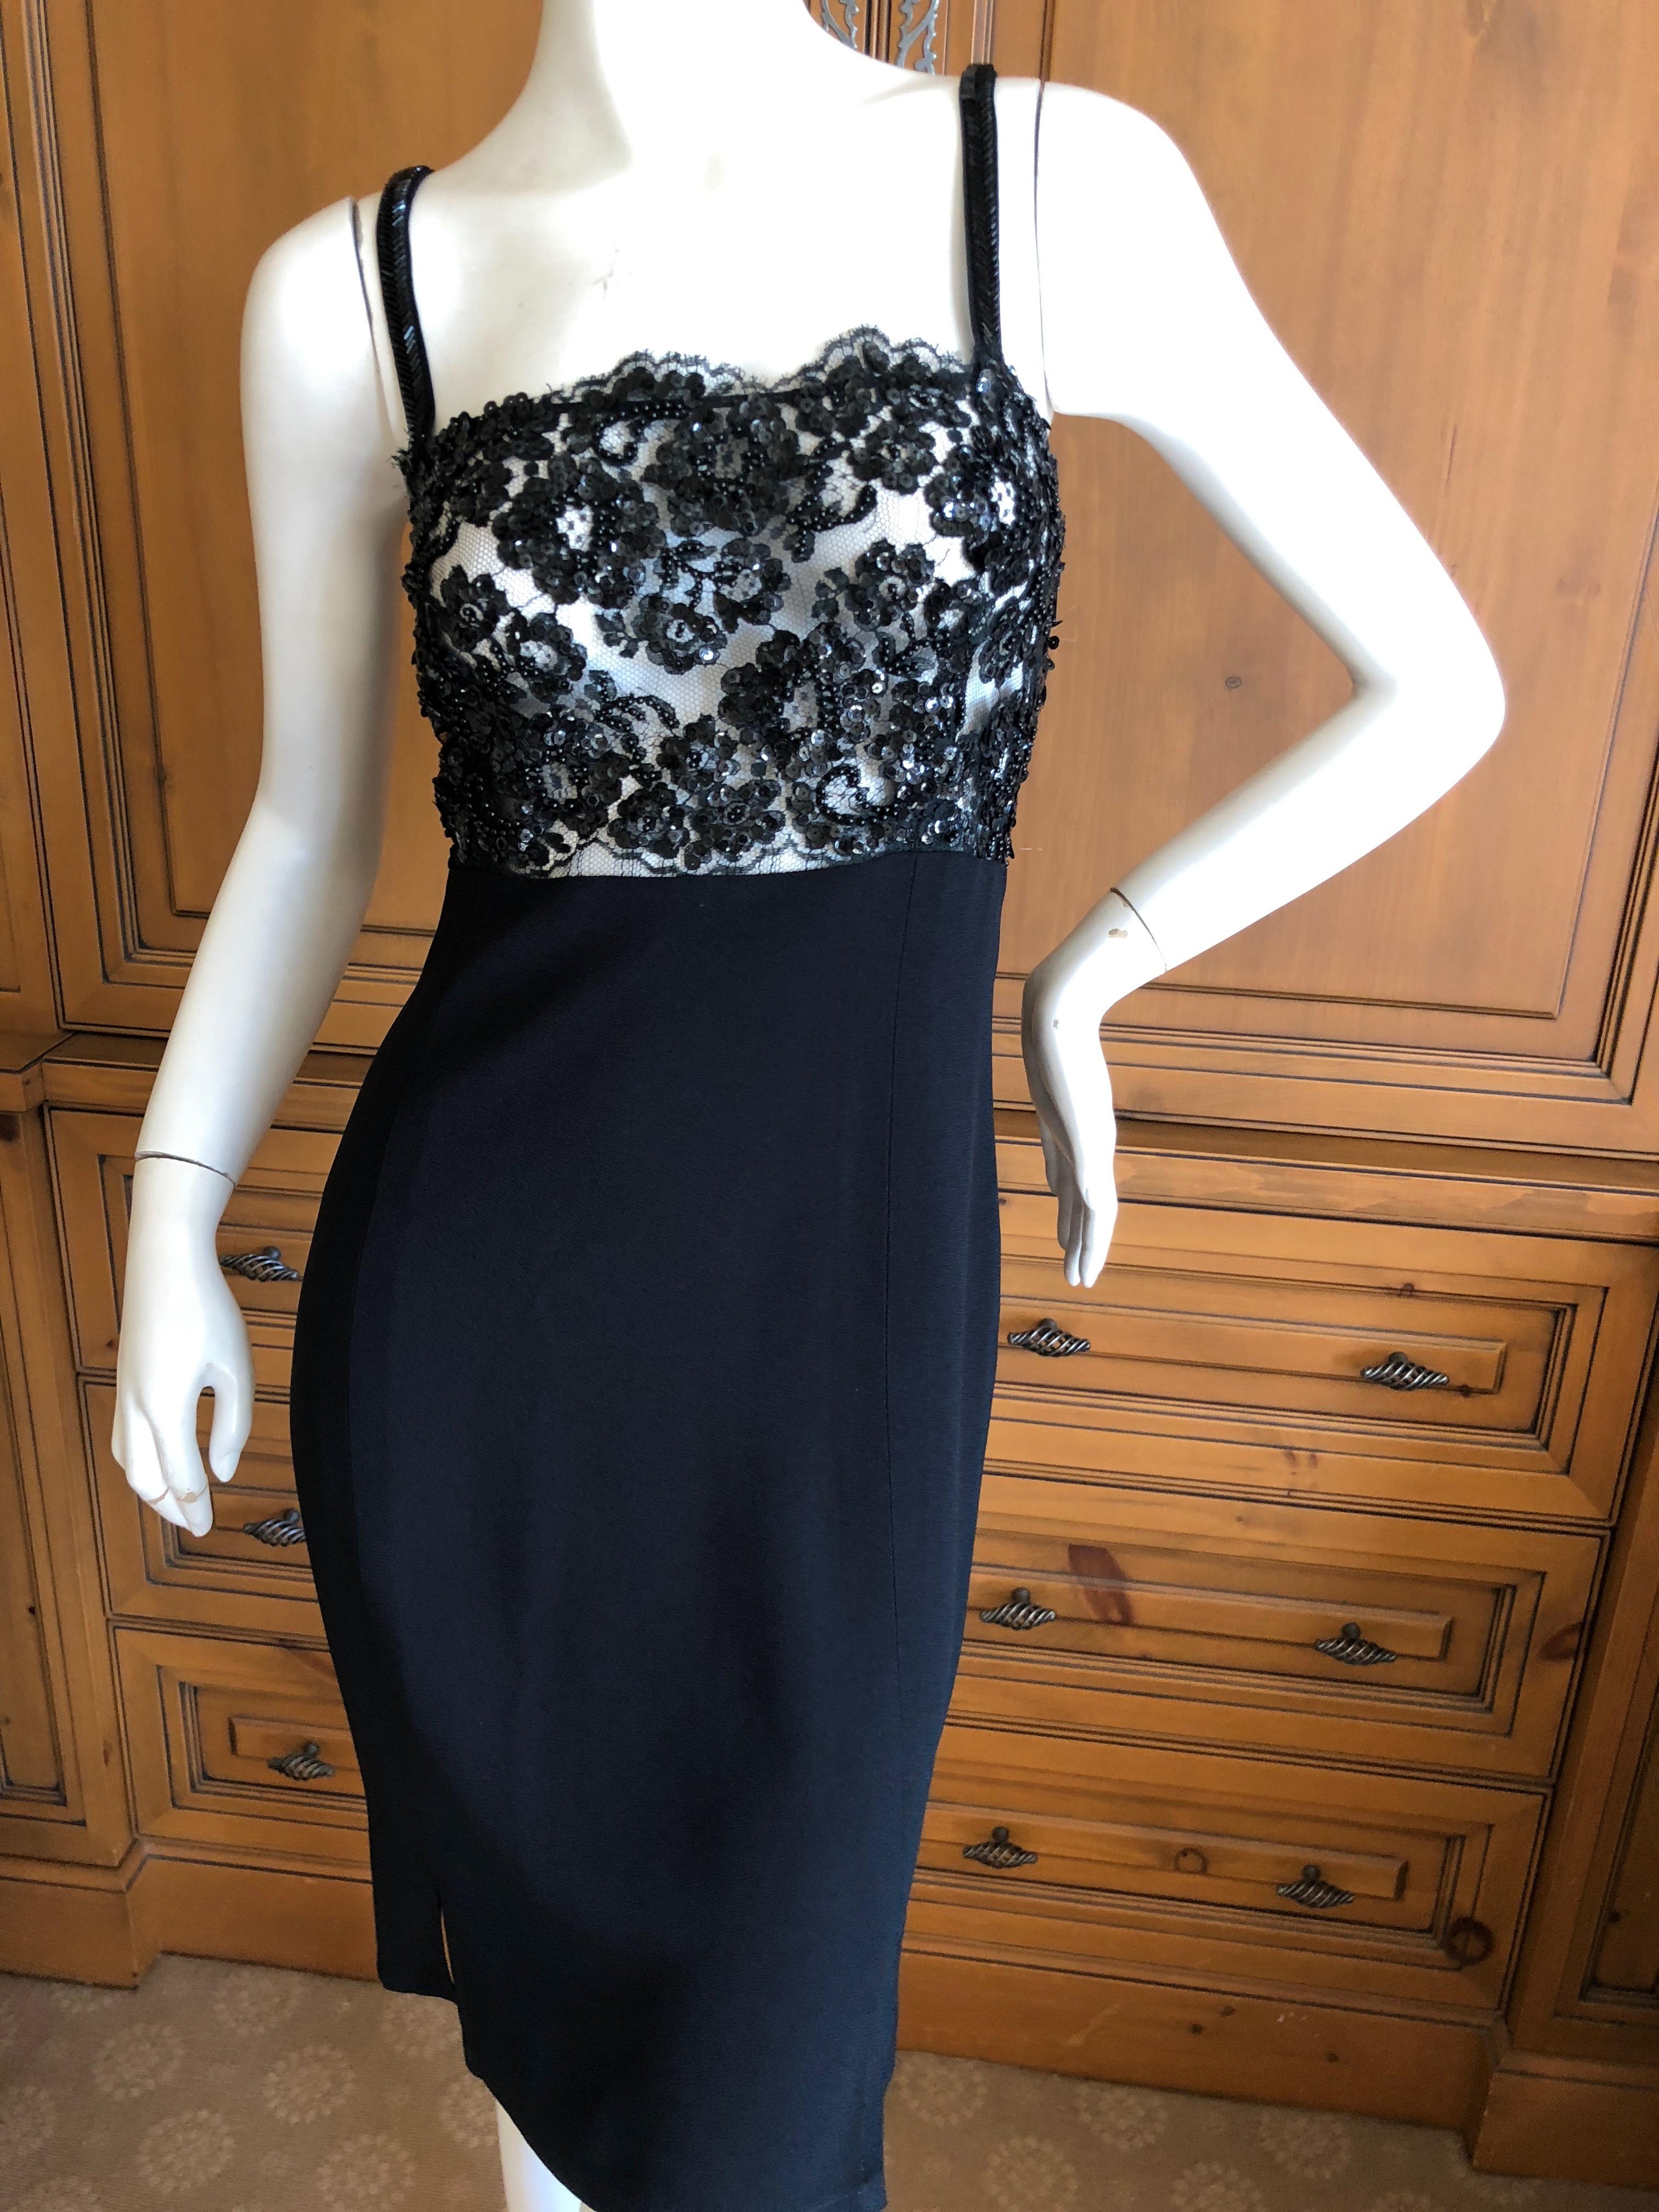 Sonia Rykiel LBD with Sheer Sequin Accented Lace Bodice
Marked size 44, but it runs a bit small for that size
Bust 38